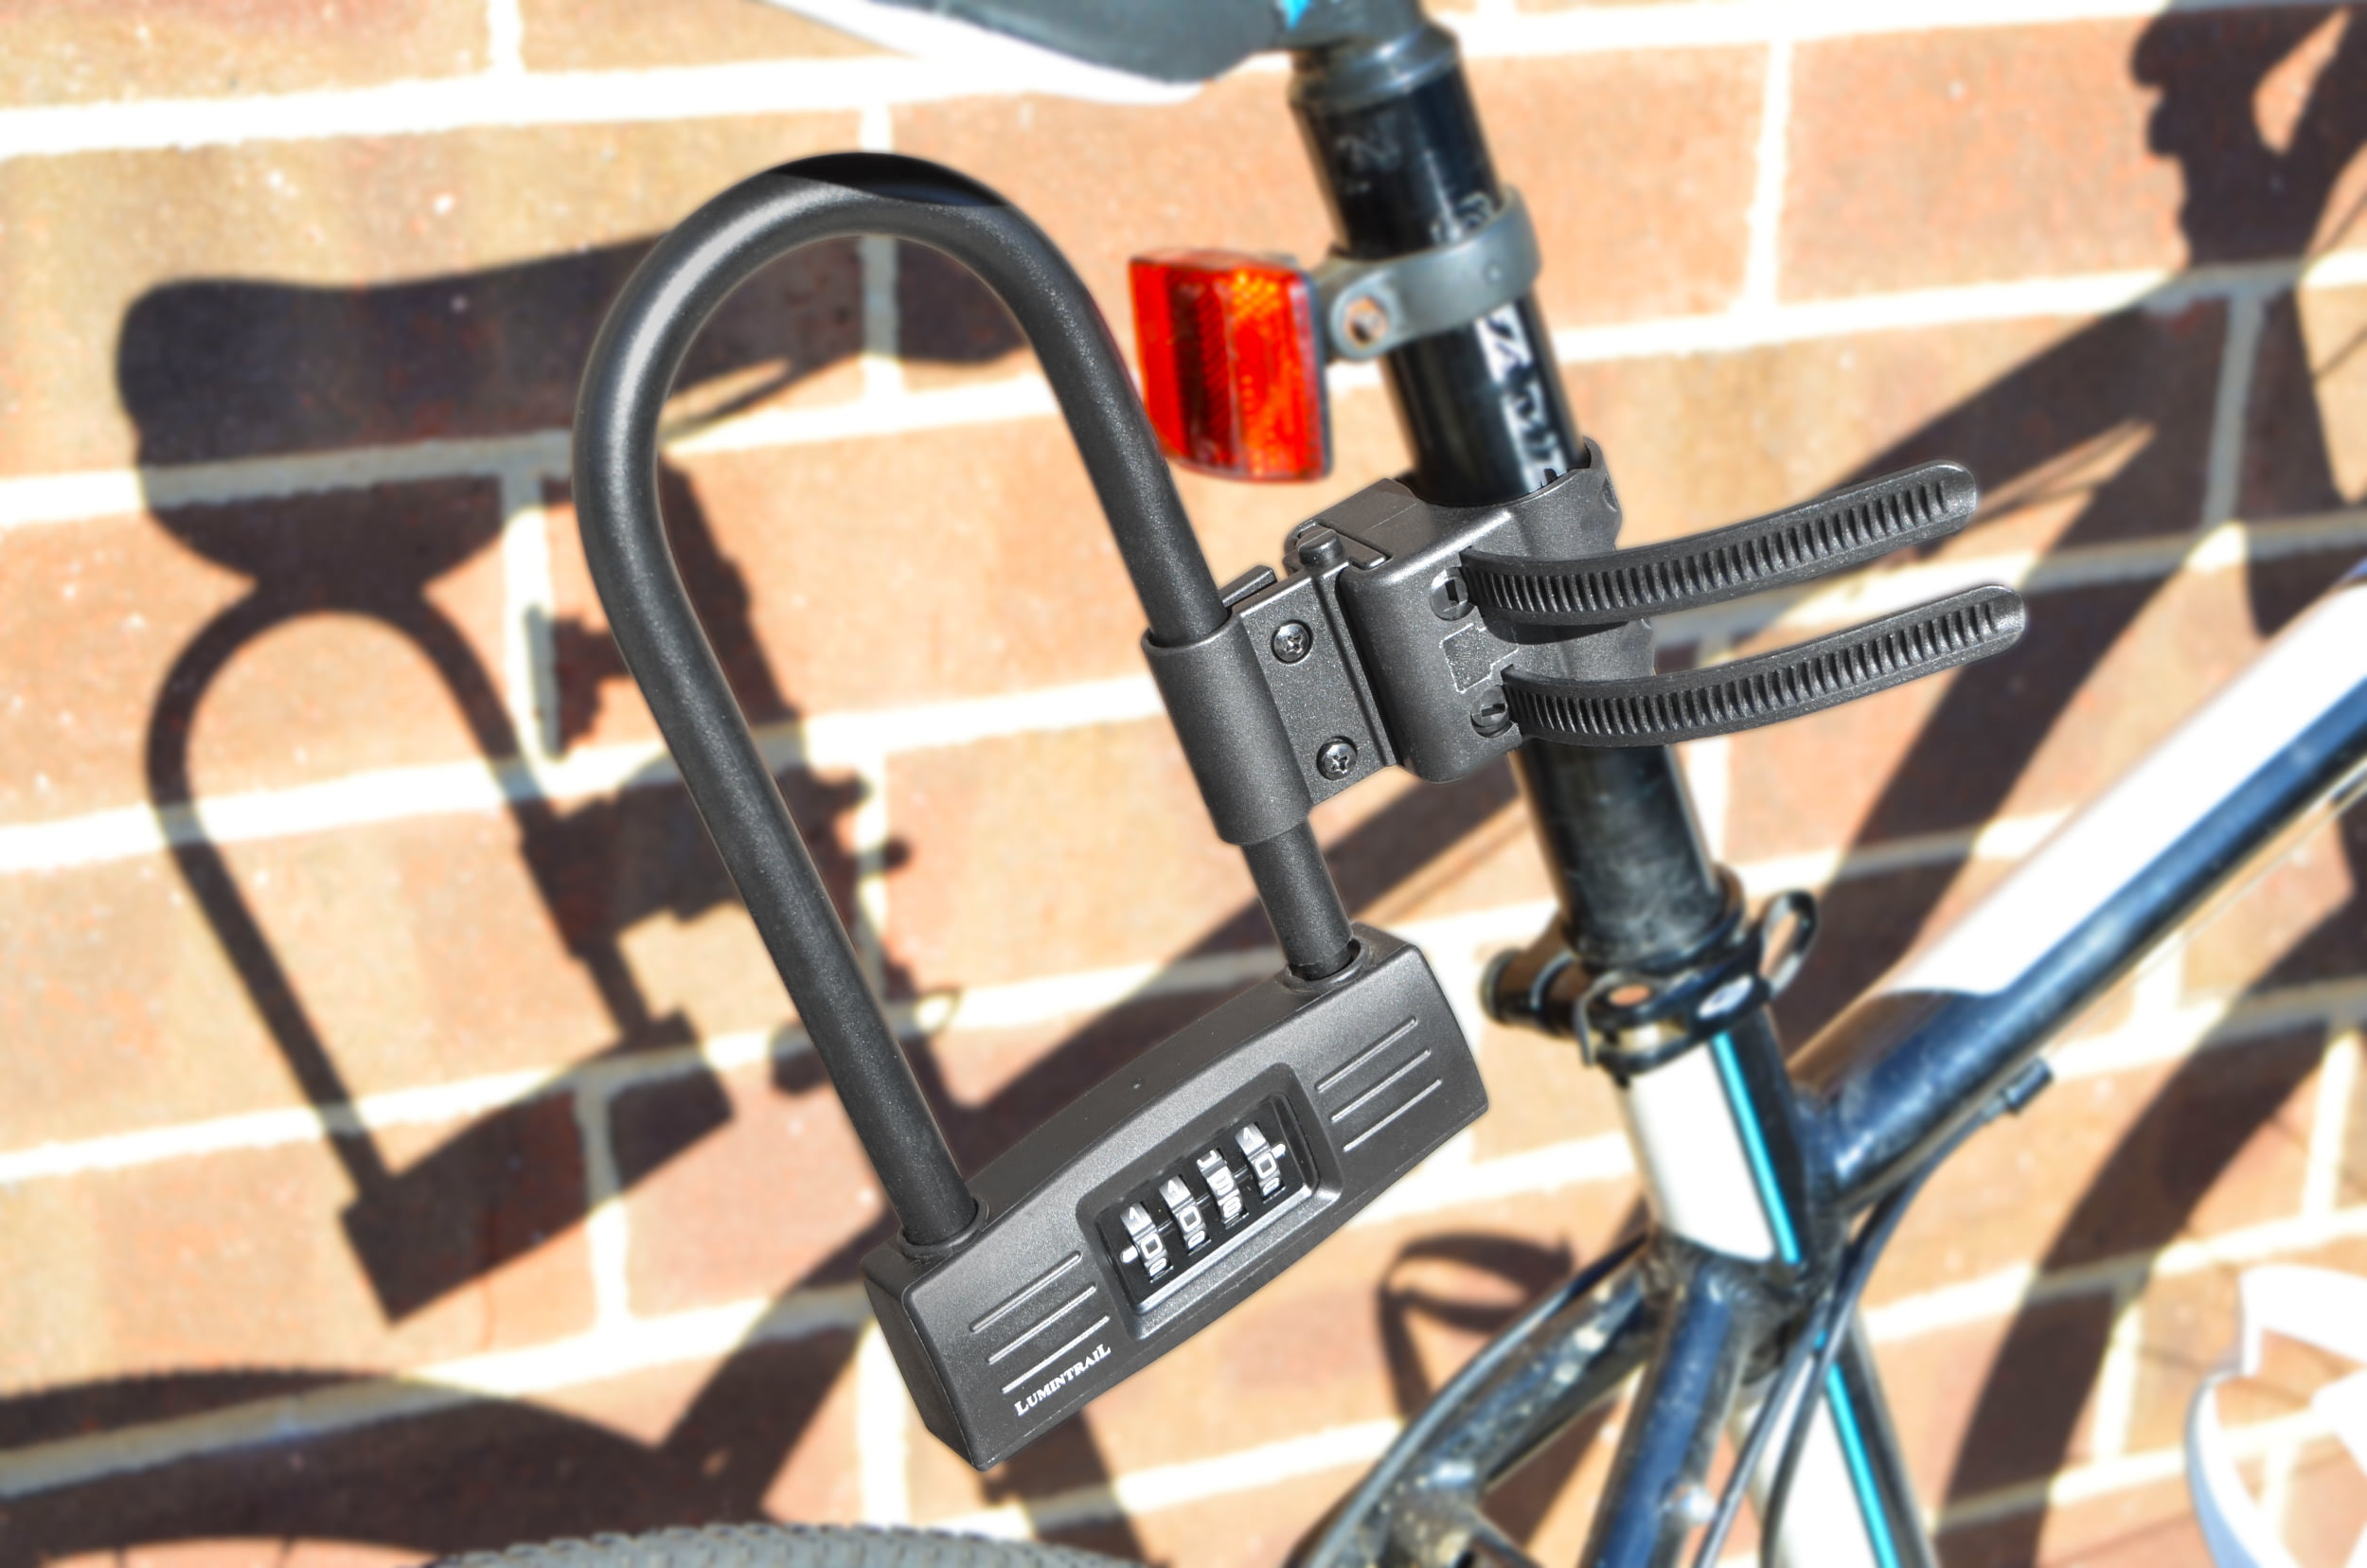 Lumintrail Bicycle 4 Digit Combination Cable Lock and U-Lock with Mount Brackets